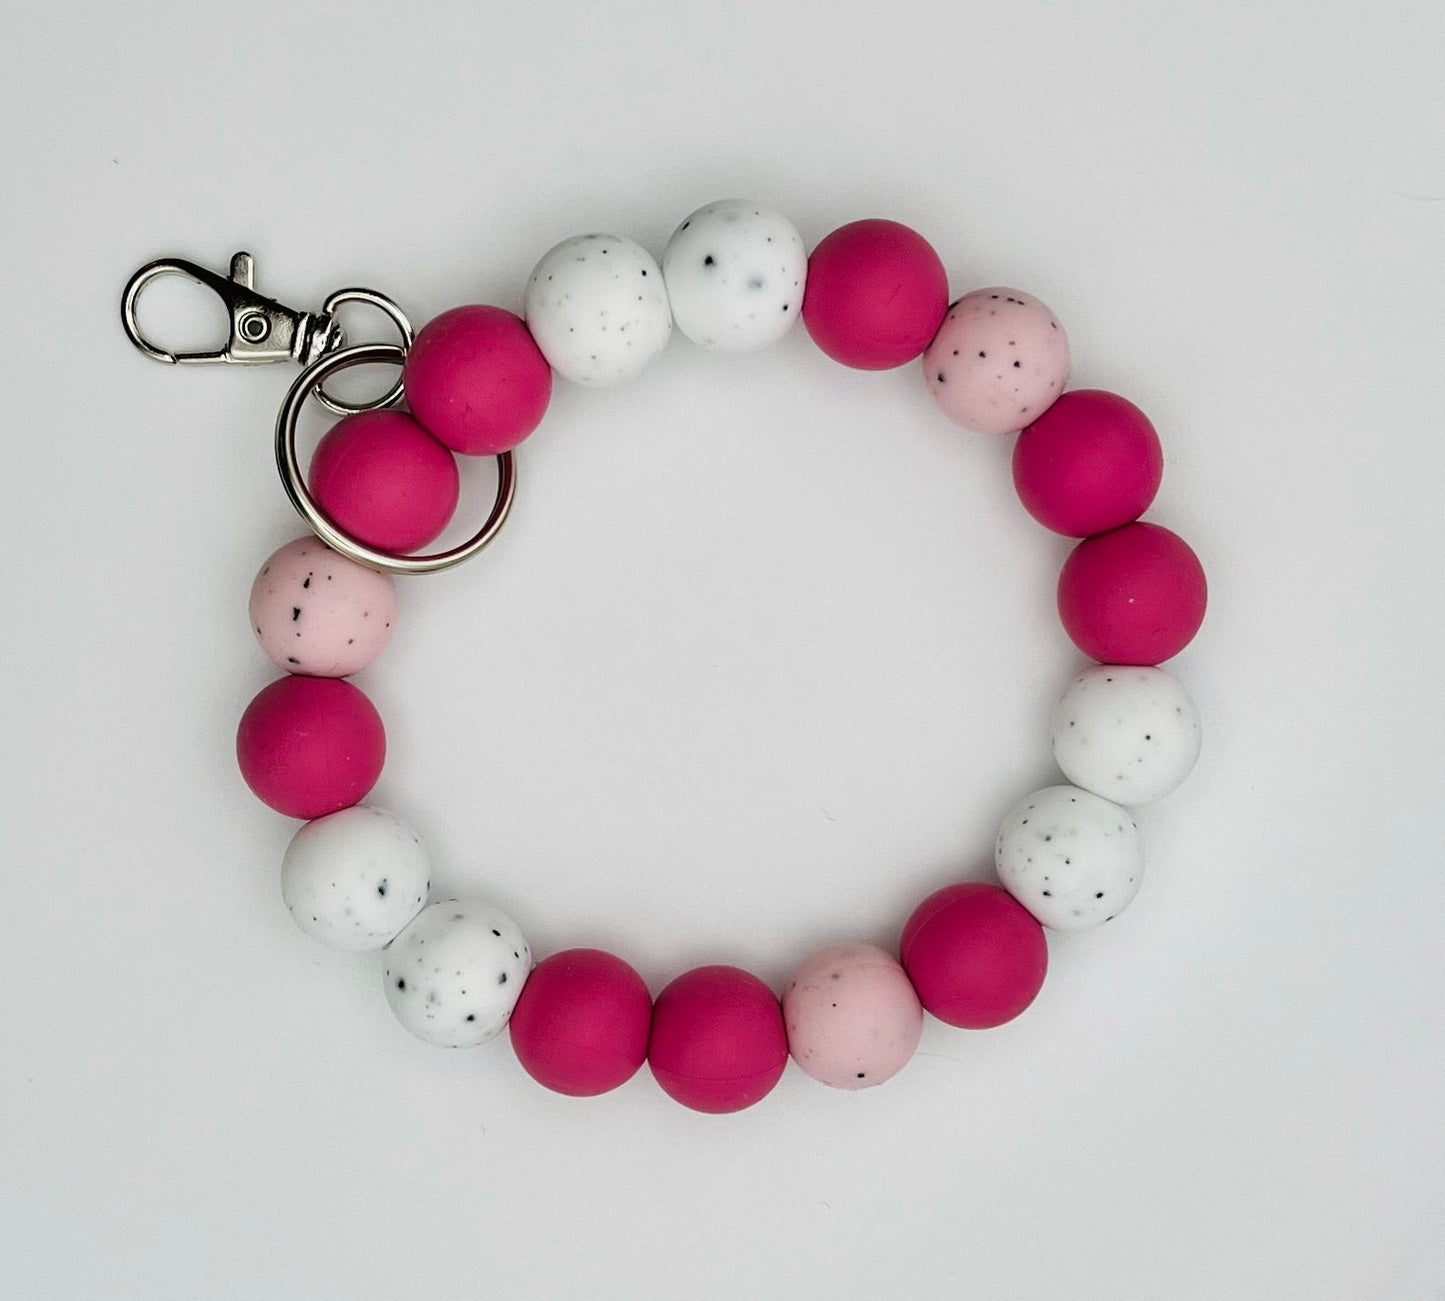 Magenta/White and Pink Speckled Silicone Keychain Wristlets